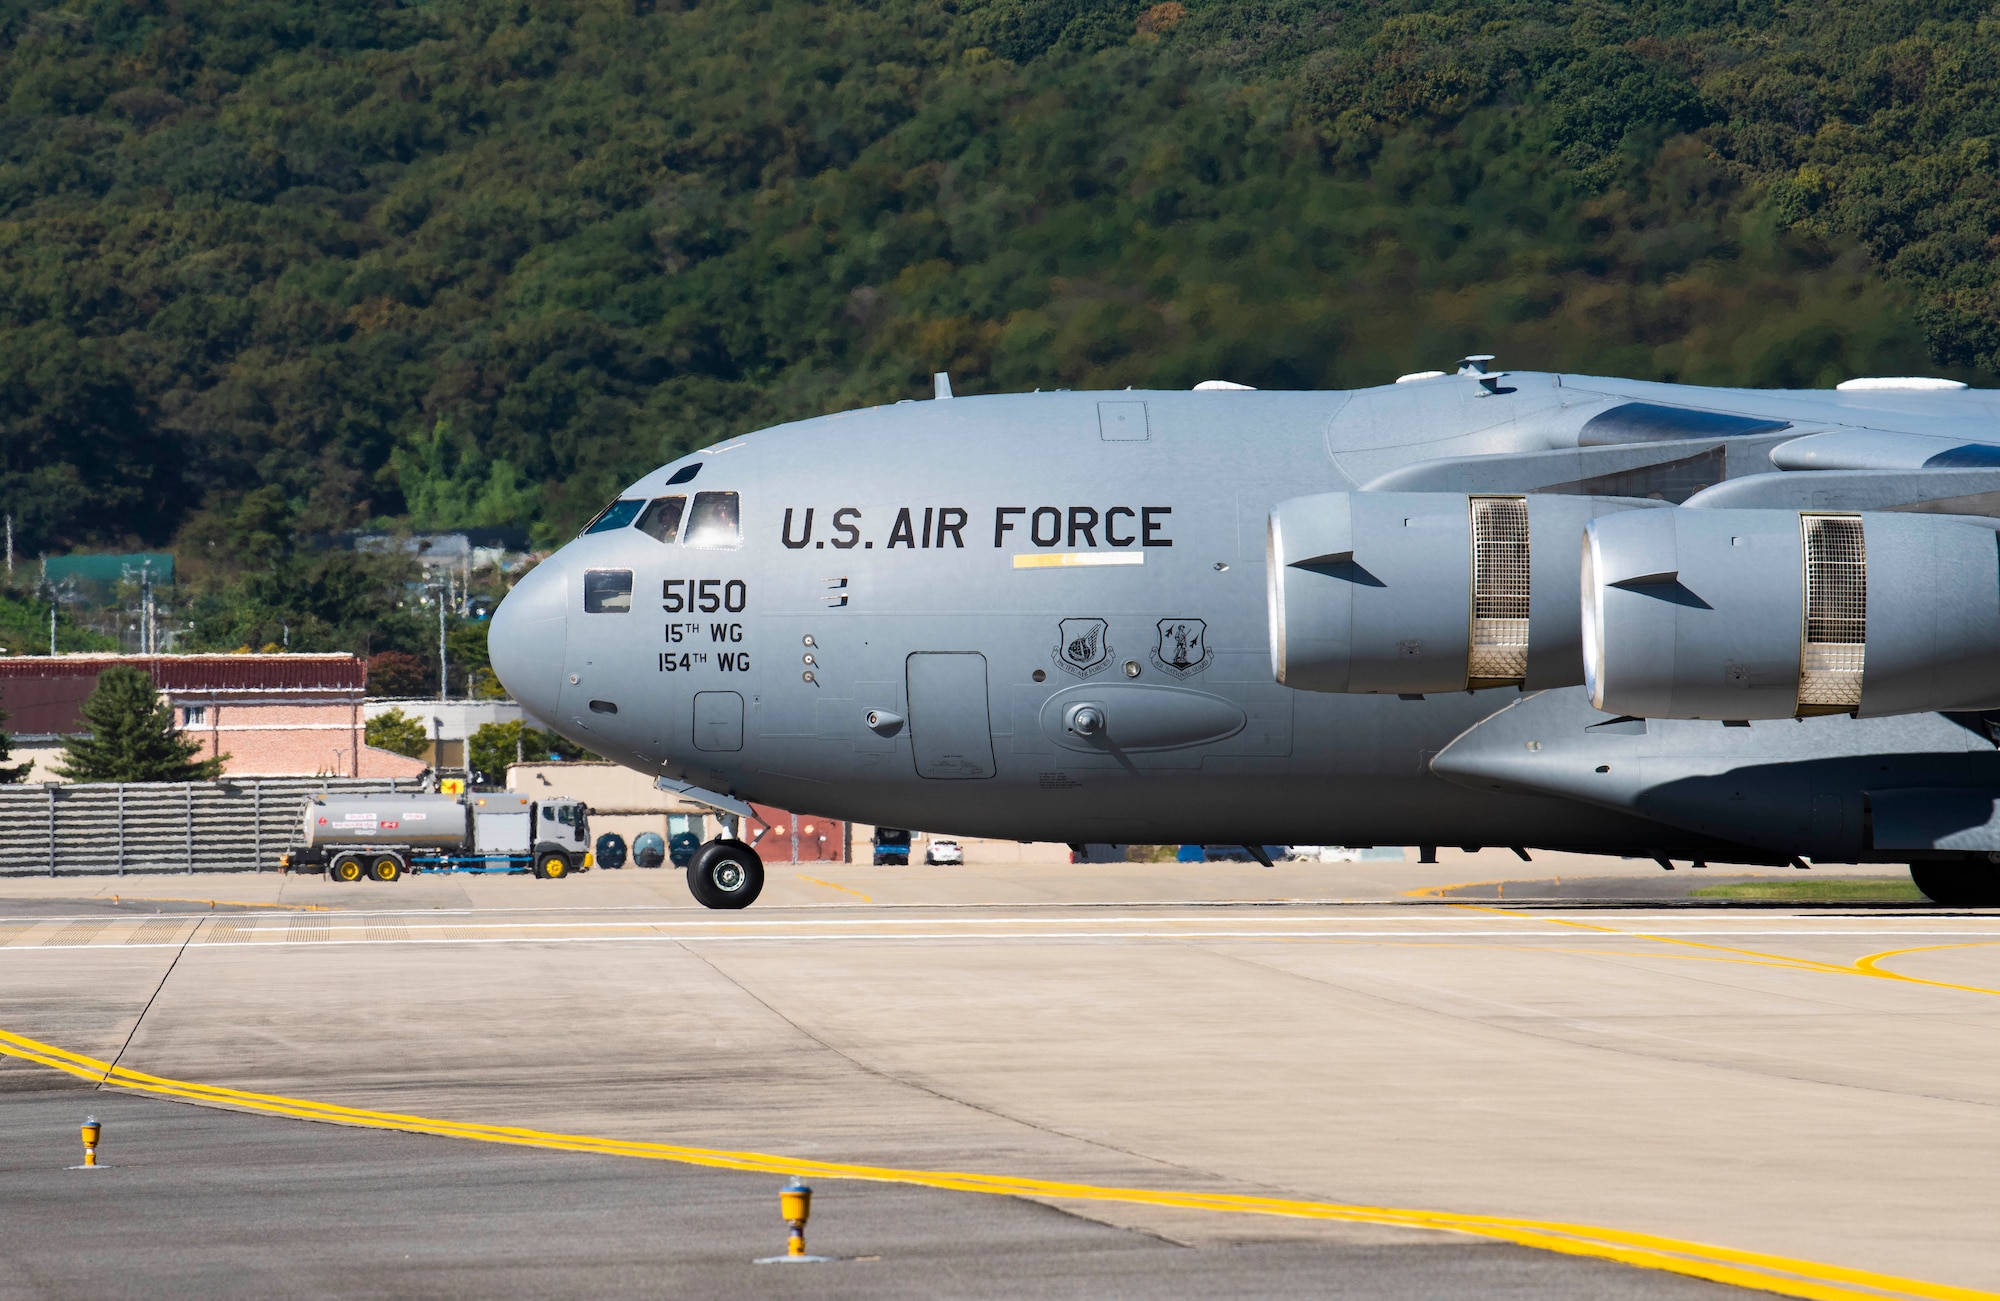 A C-17 Globemaster III, assigned to Joint Base Pearl-Harbor Hickam, Hawaii, taxis on the flightline following an aerial demonstration as part of the Seoul International Aerospace and Defense Exhibition 2021, at Seoul Air Base, Republic of Korea, Oct. 17, 2021. Seoul ADEX 21 is the largest, most comprehensive event of its kind in Northeast Asia, attracting aviation and industry professionals, key defense personnel, aviation enthusiasts and the general public alike. (U.S. Air Force photo by Staff Sgt. Gabrielle Spalding)